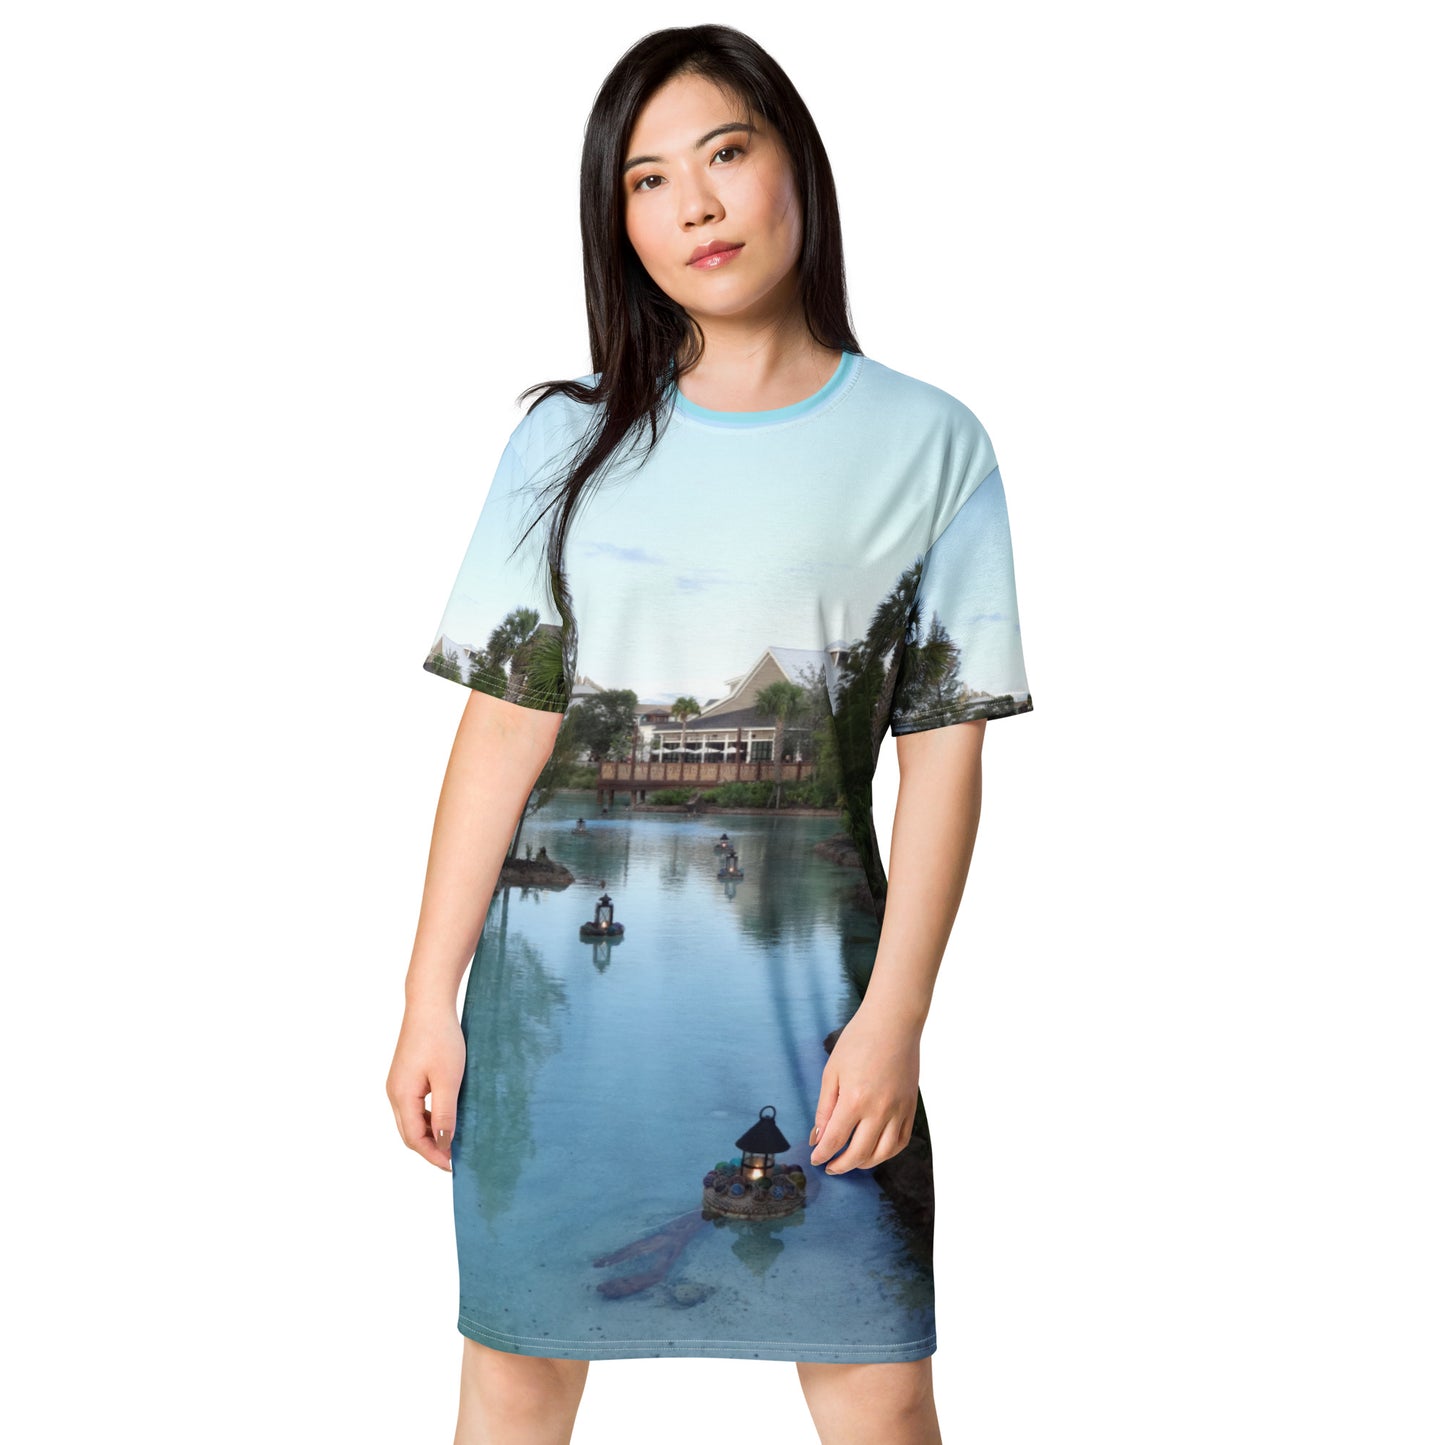 Pictured is a women wearing an all over print tshirt dress with a photograph of a little river flowing through a village - dress front